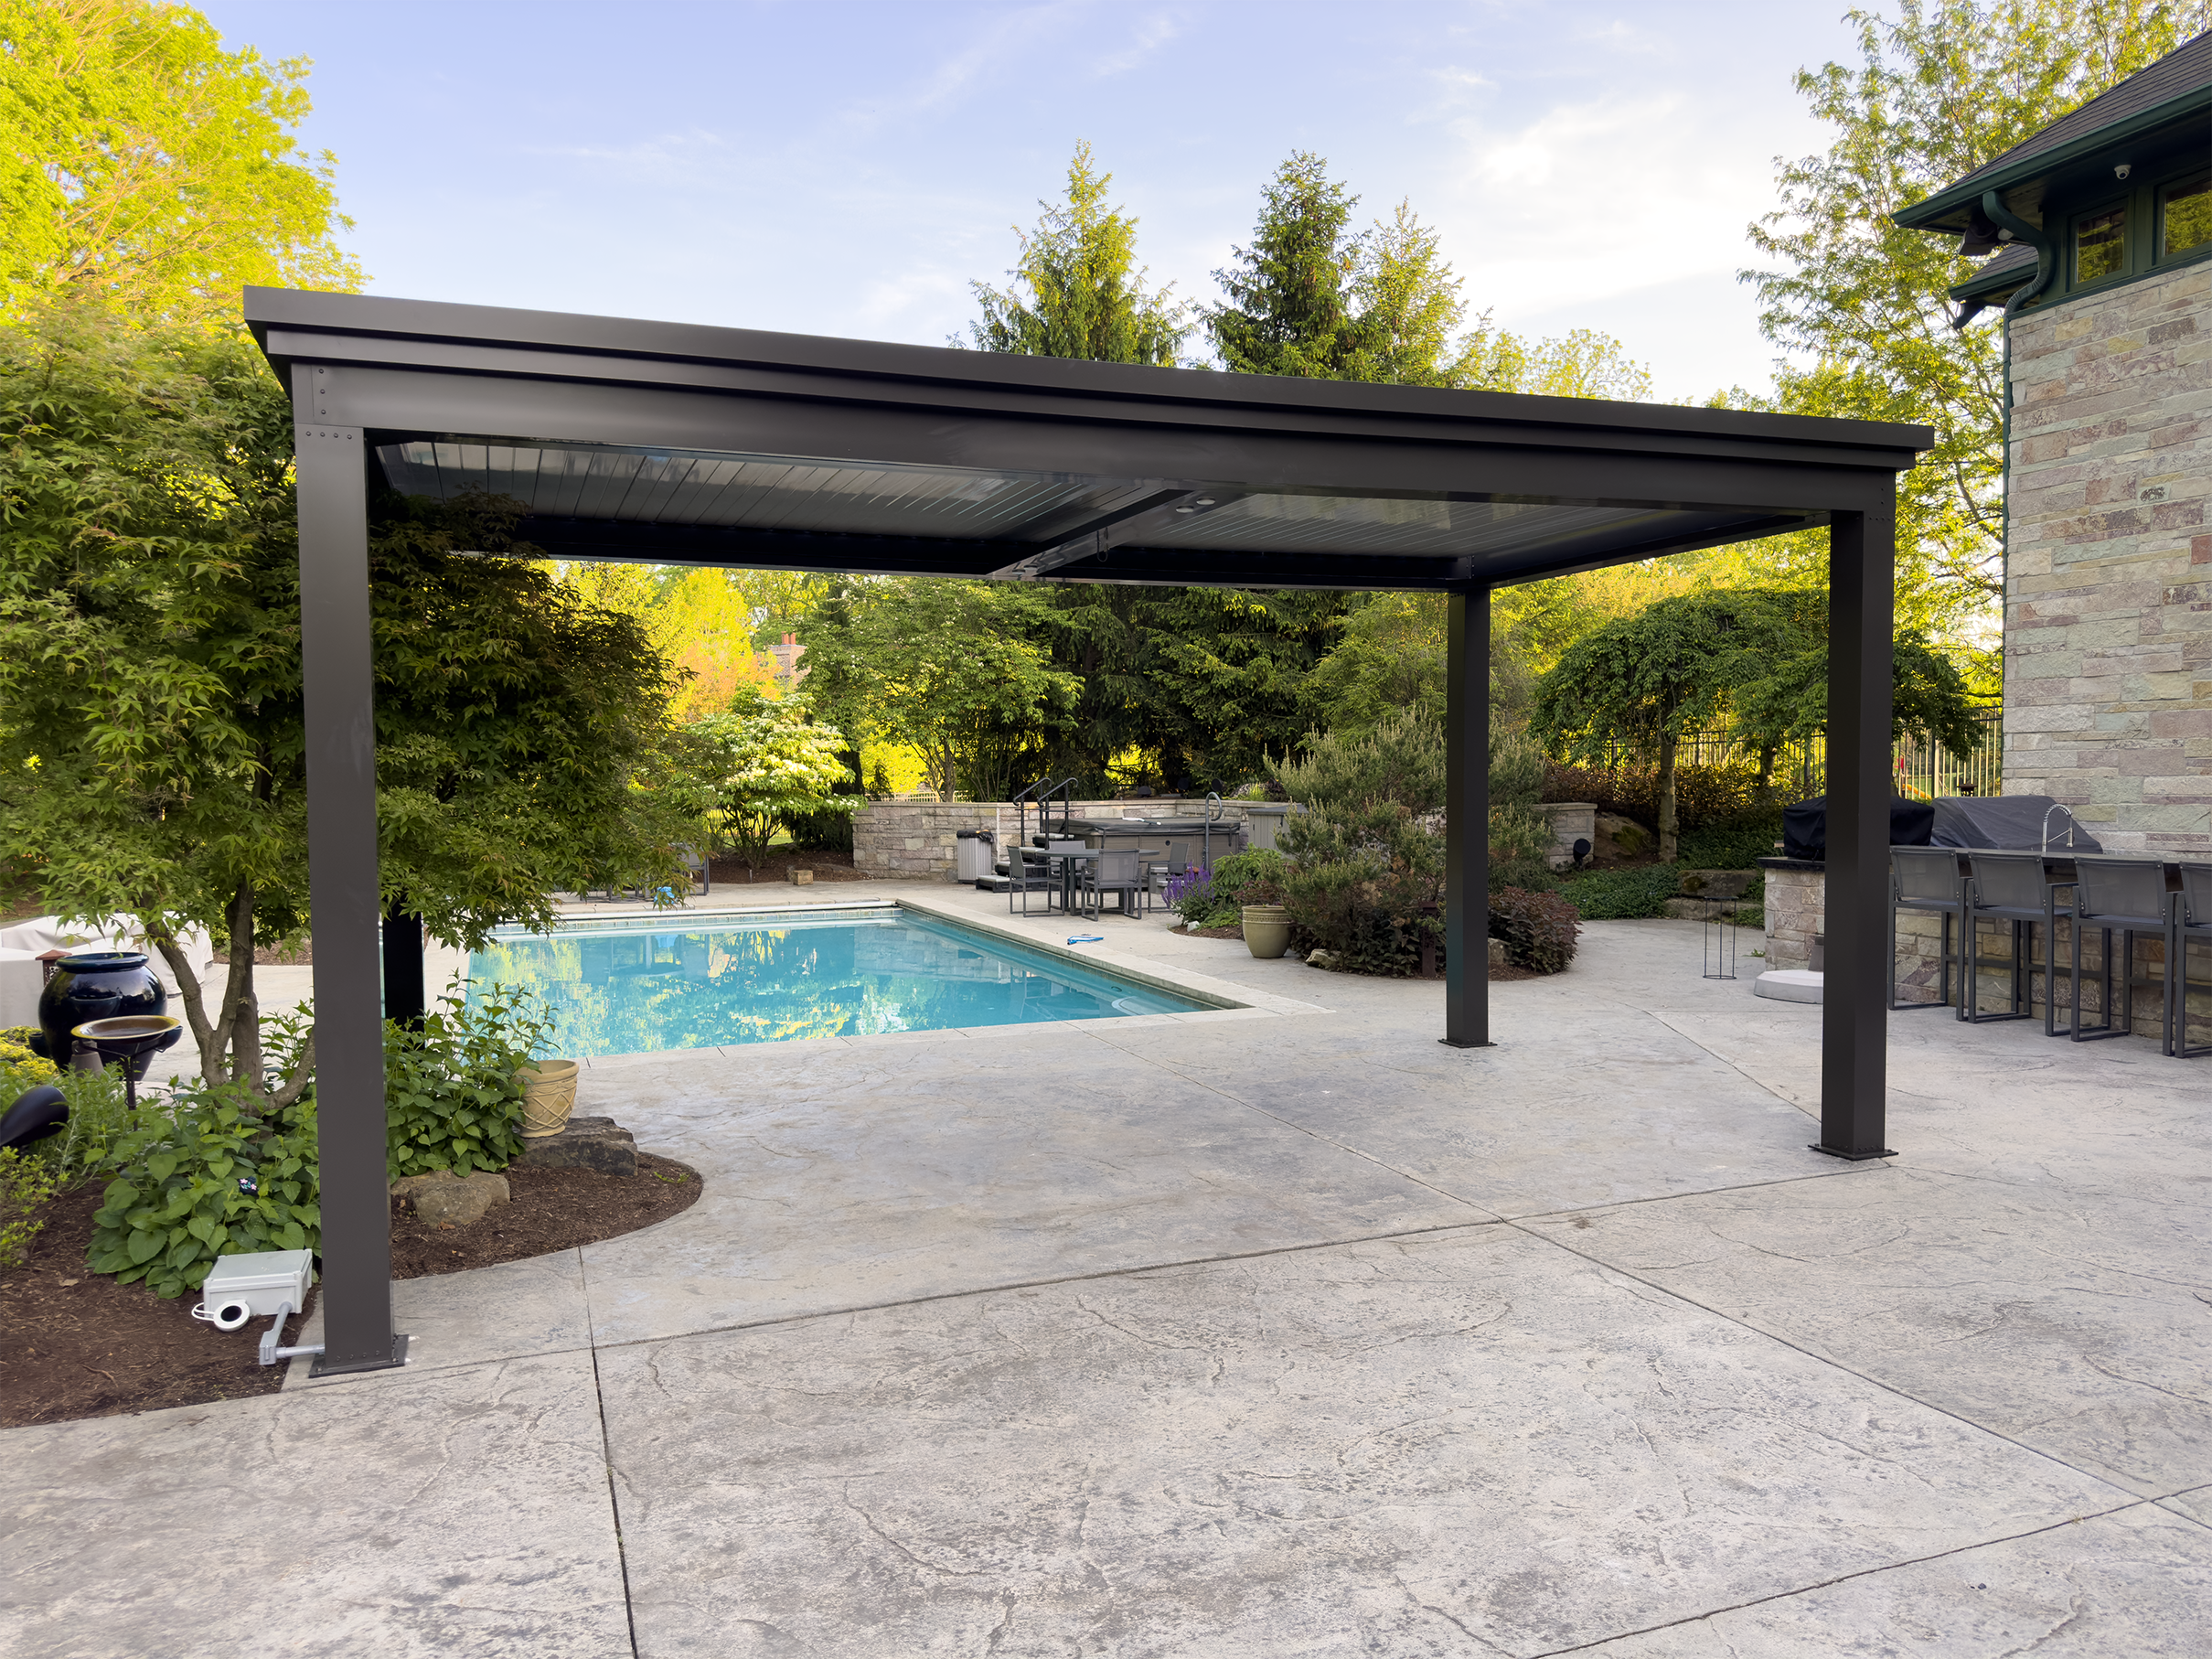 Pergola permanently attached to concrete